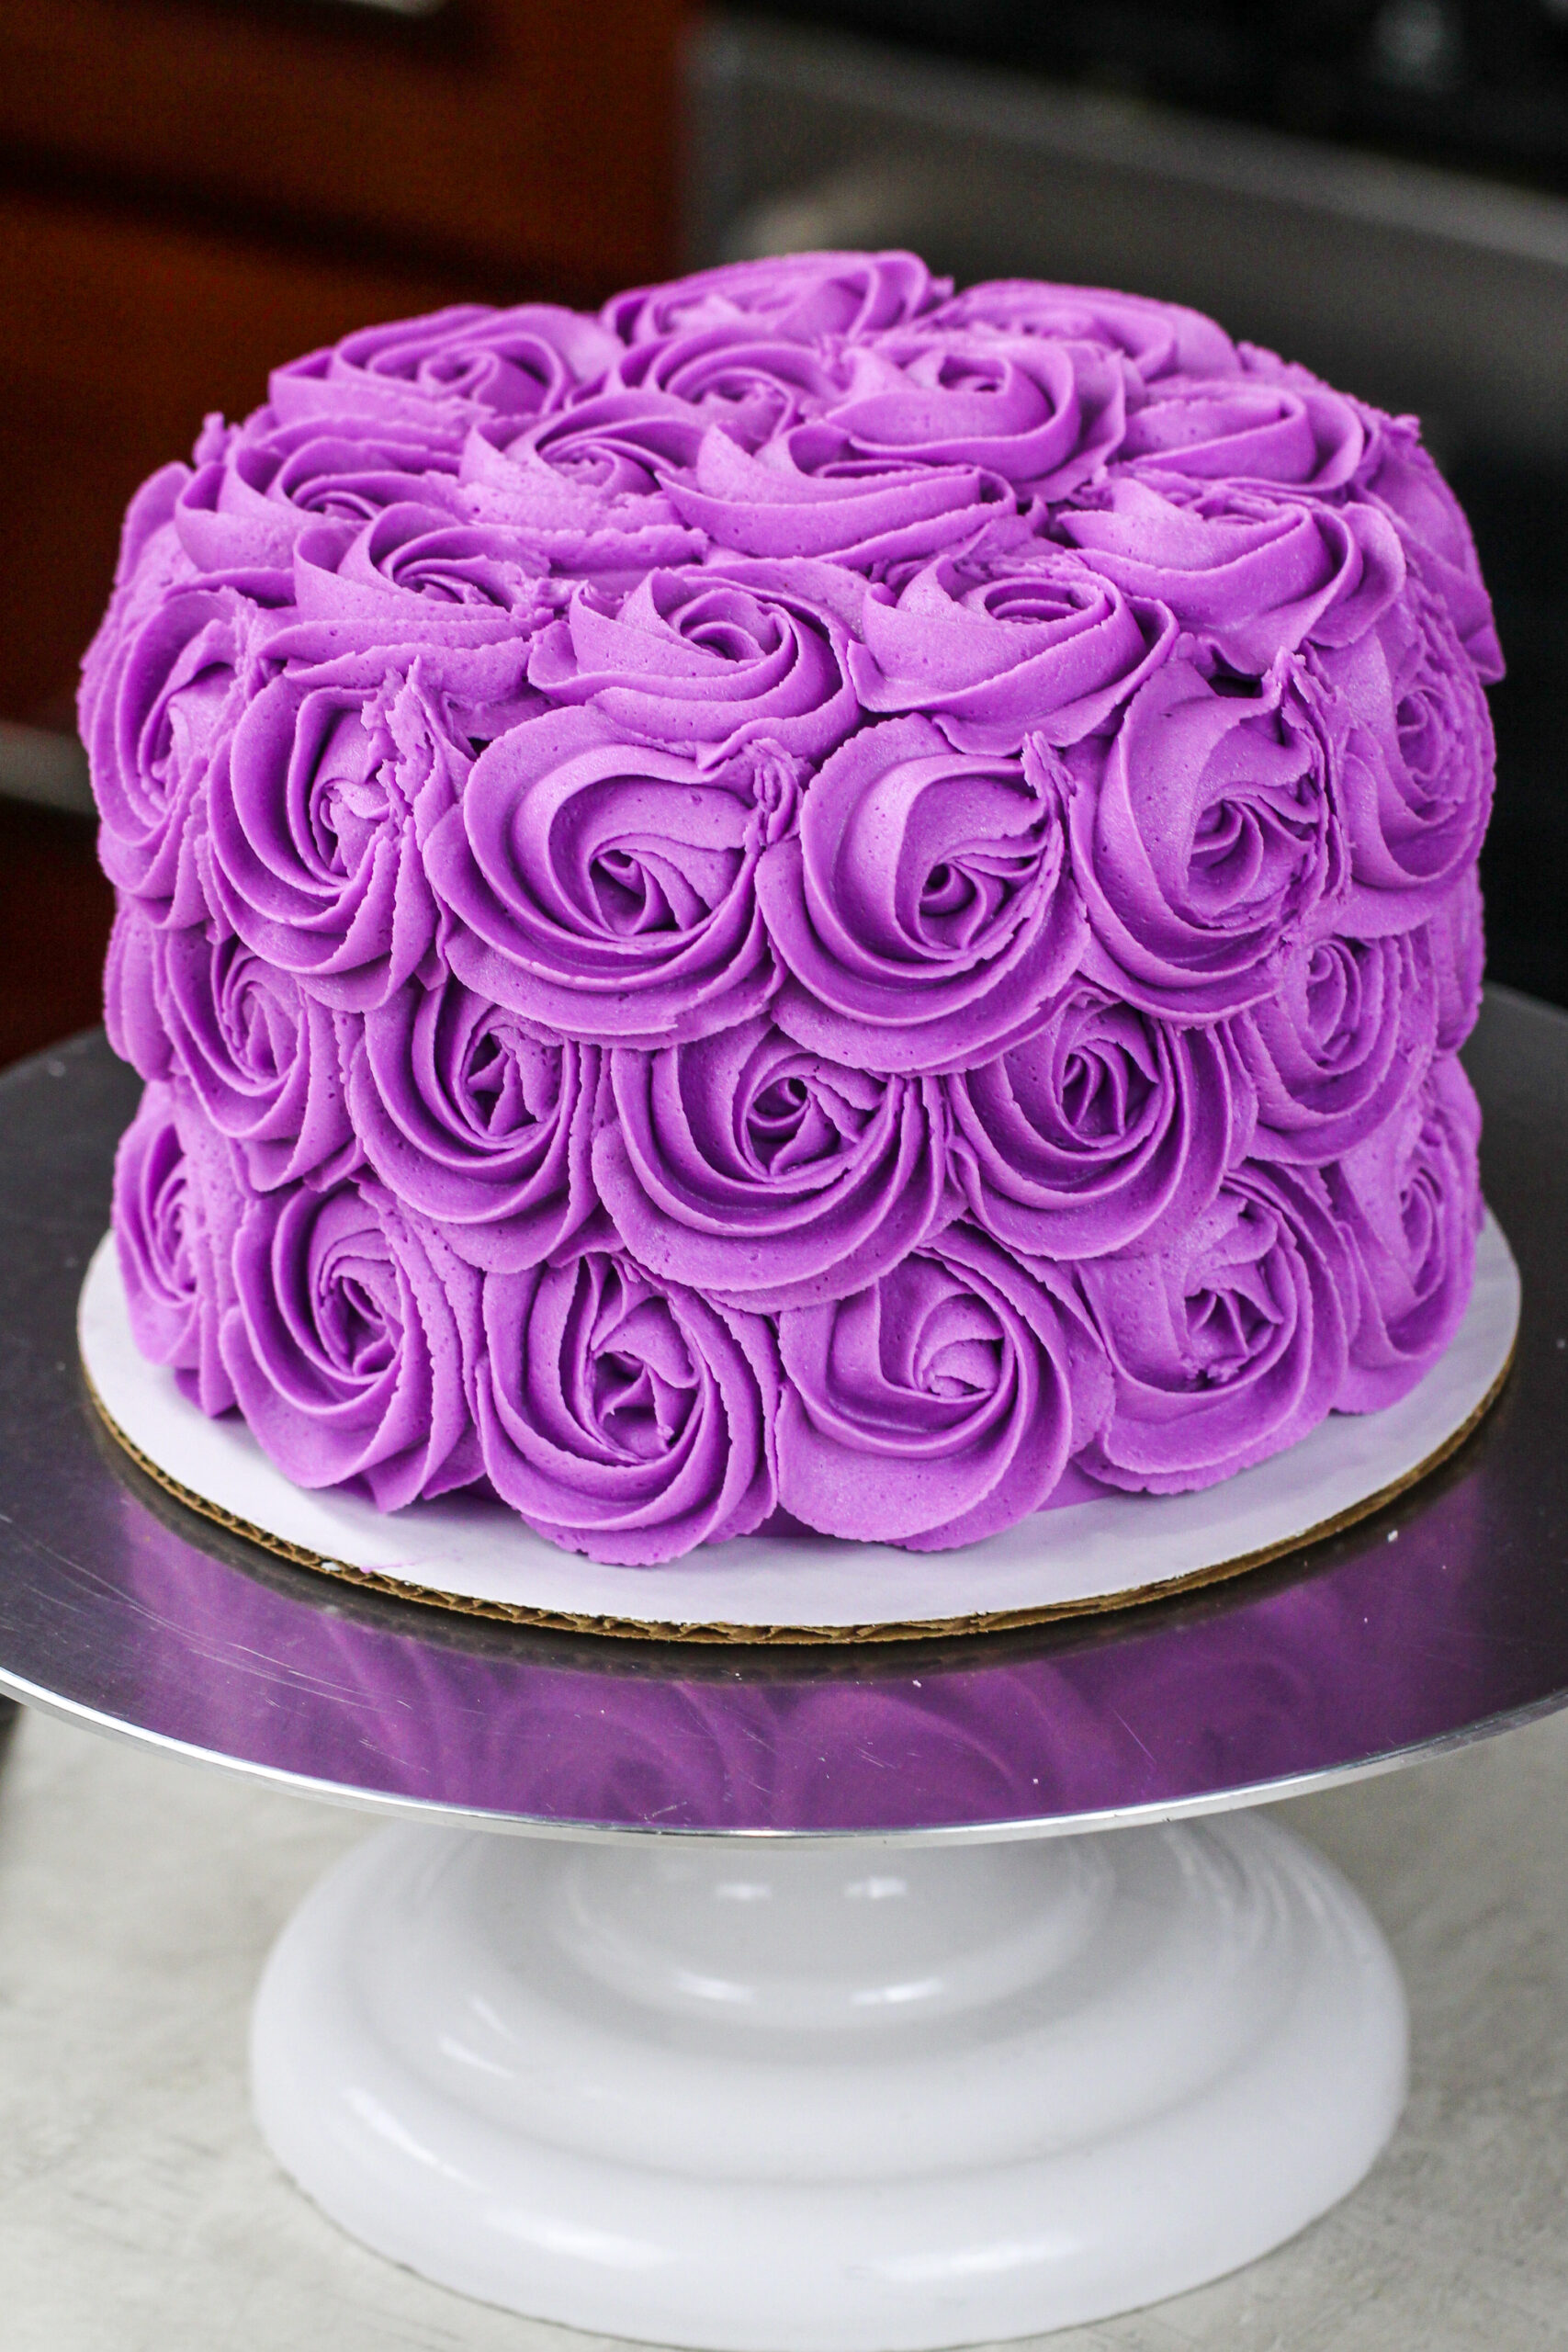 How to make Ombre Rosette Cake - Pinch of Luck - YouTube